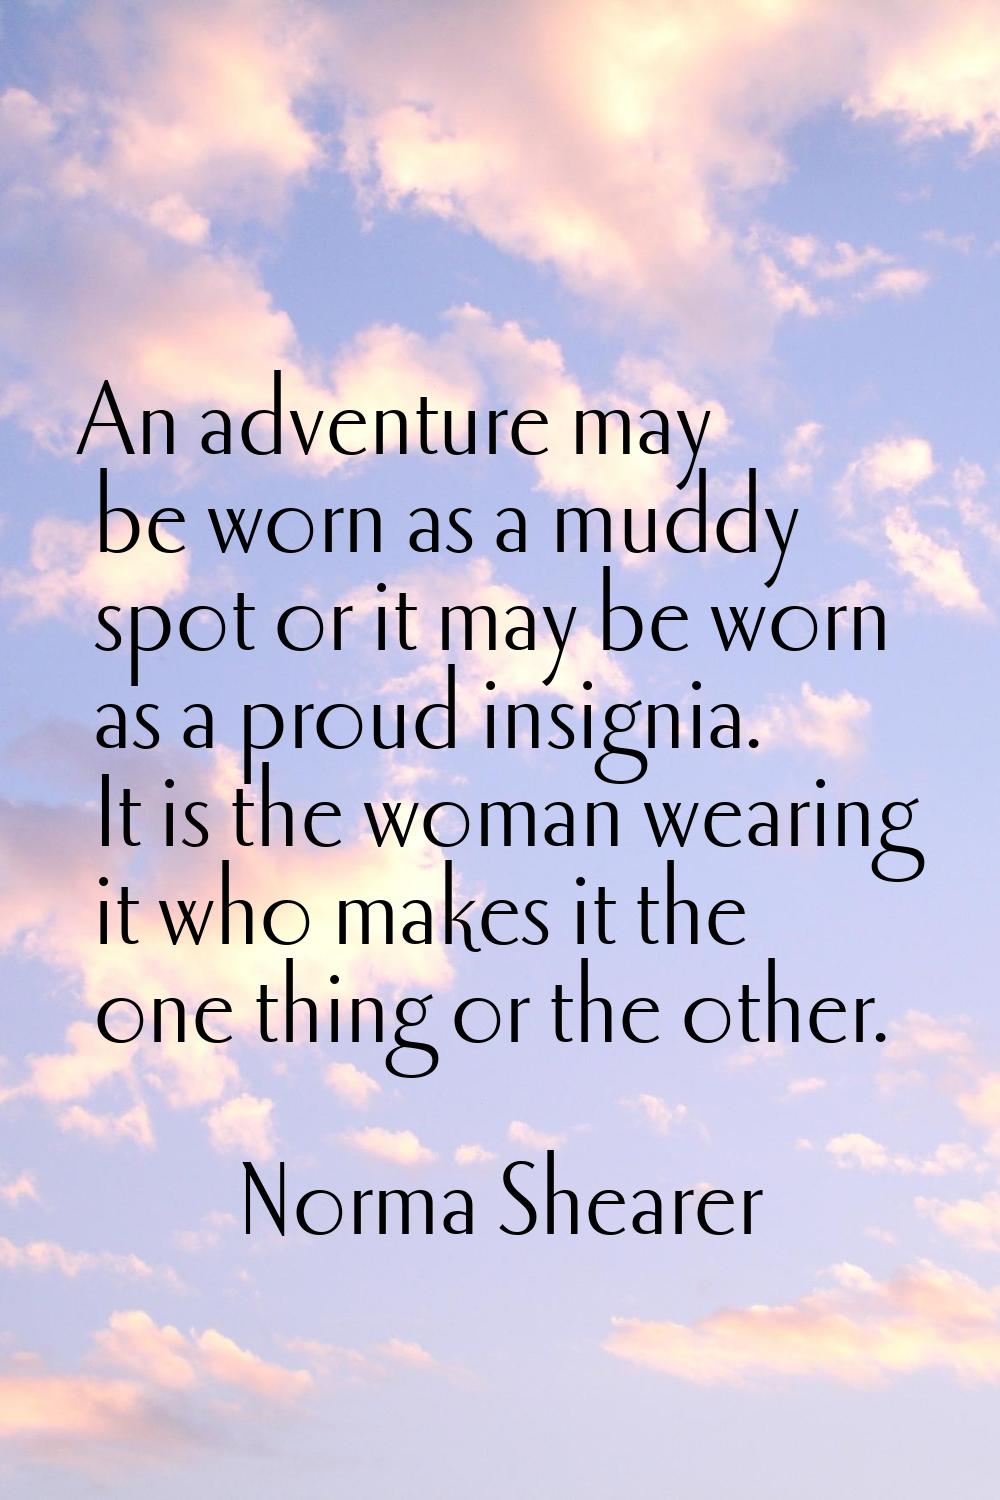 An adventure may be worn as a muddy spot or it may be worn as a proud insignia. It is the woman wea